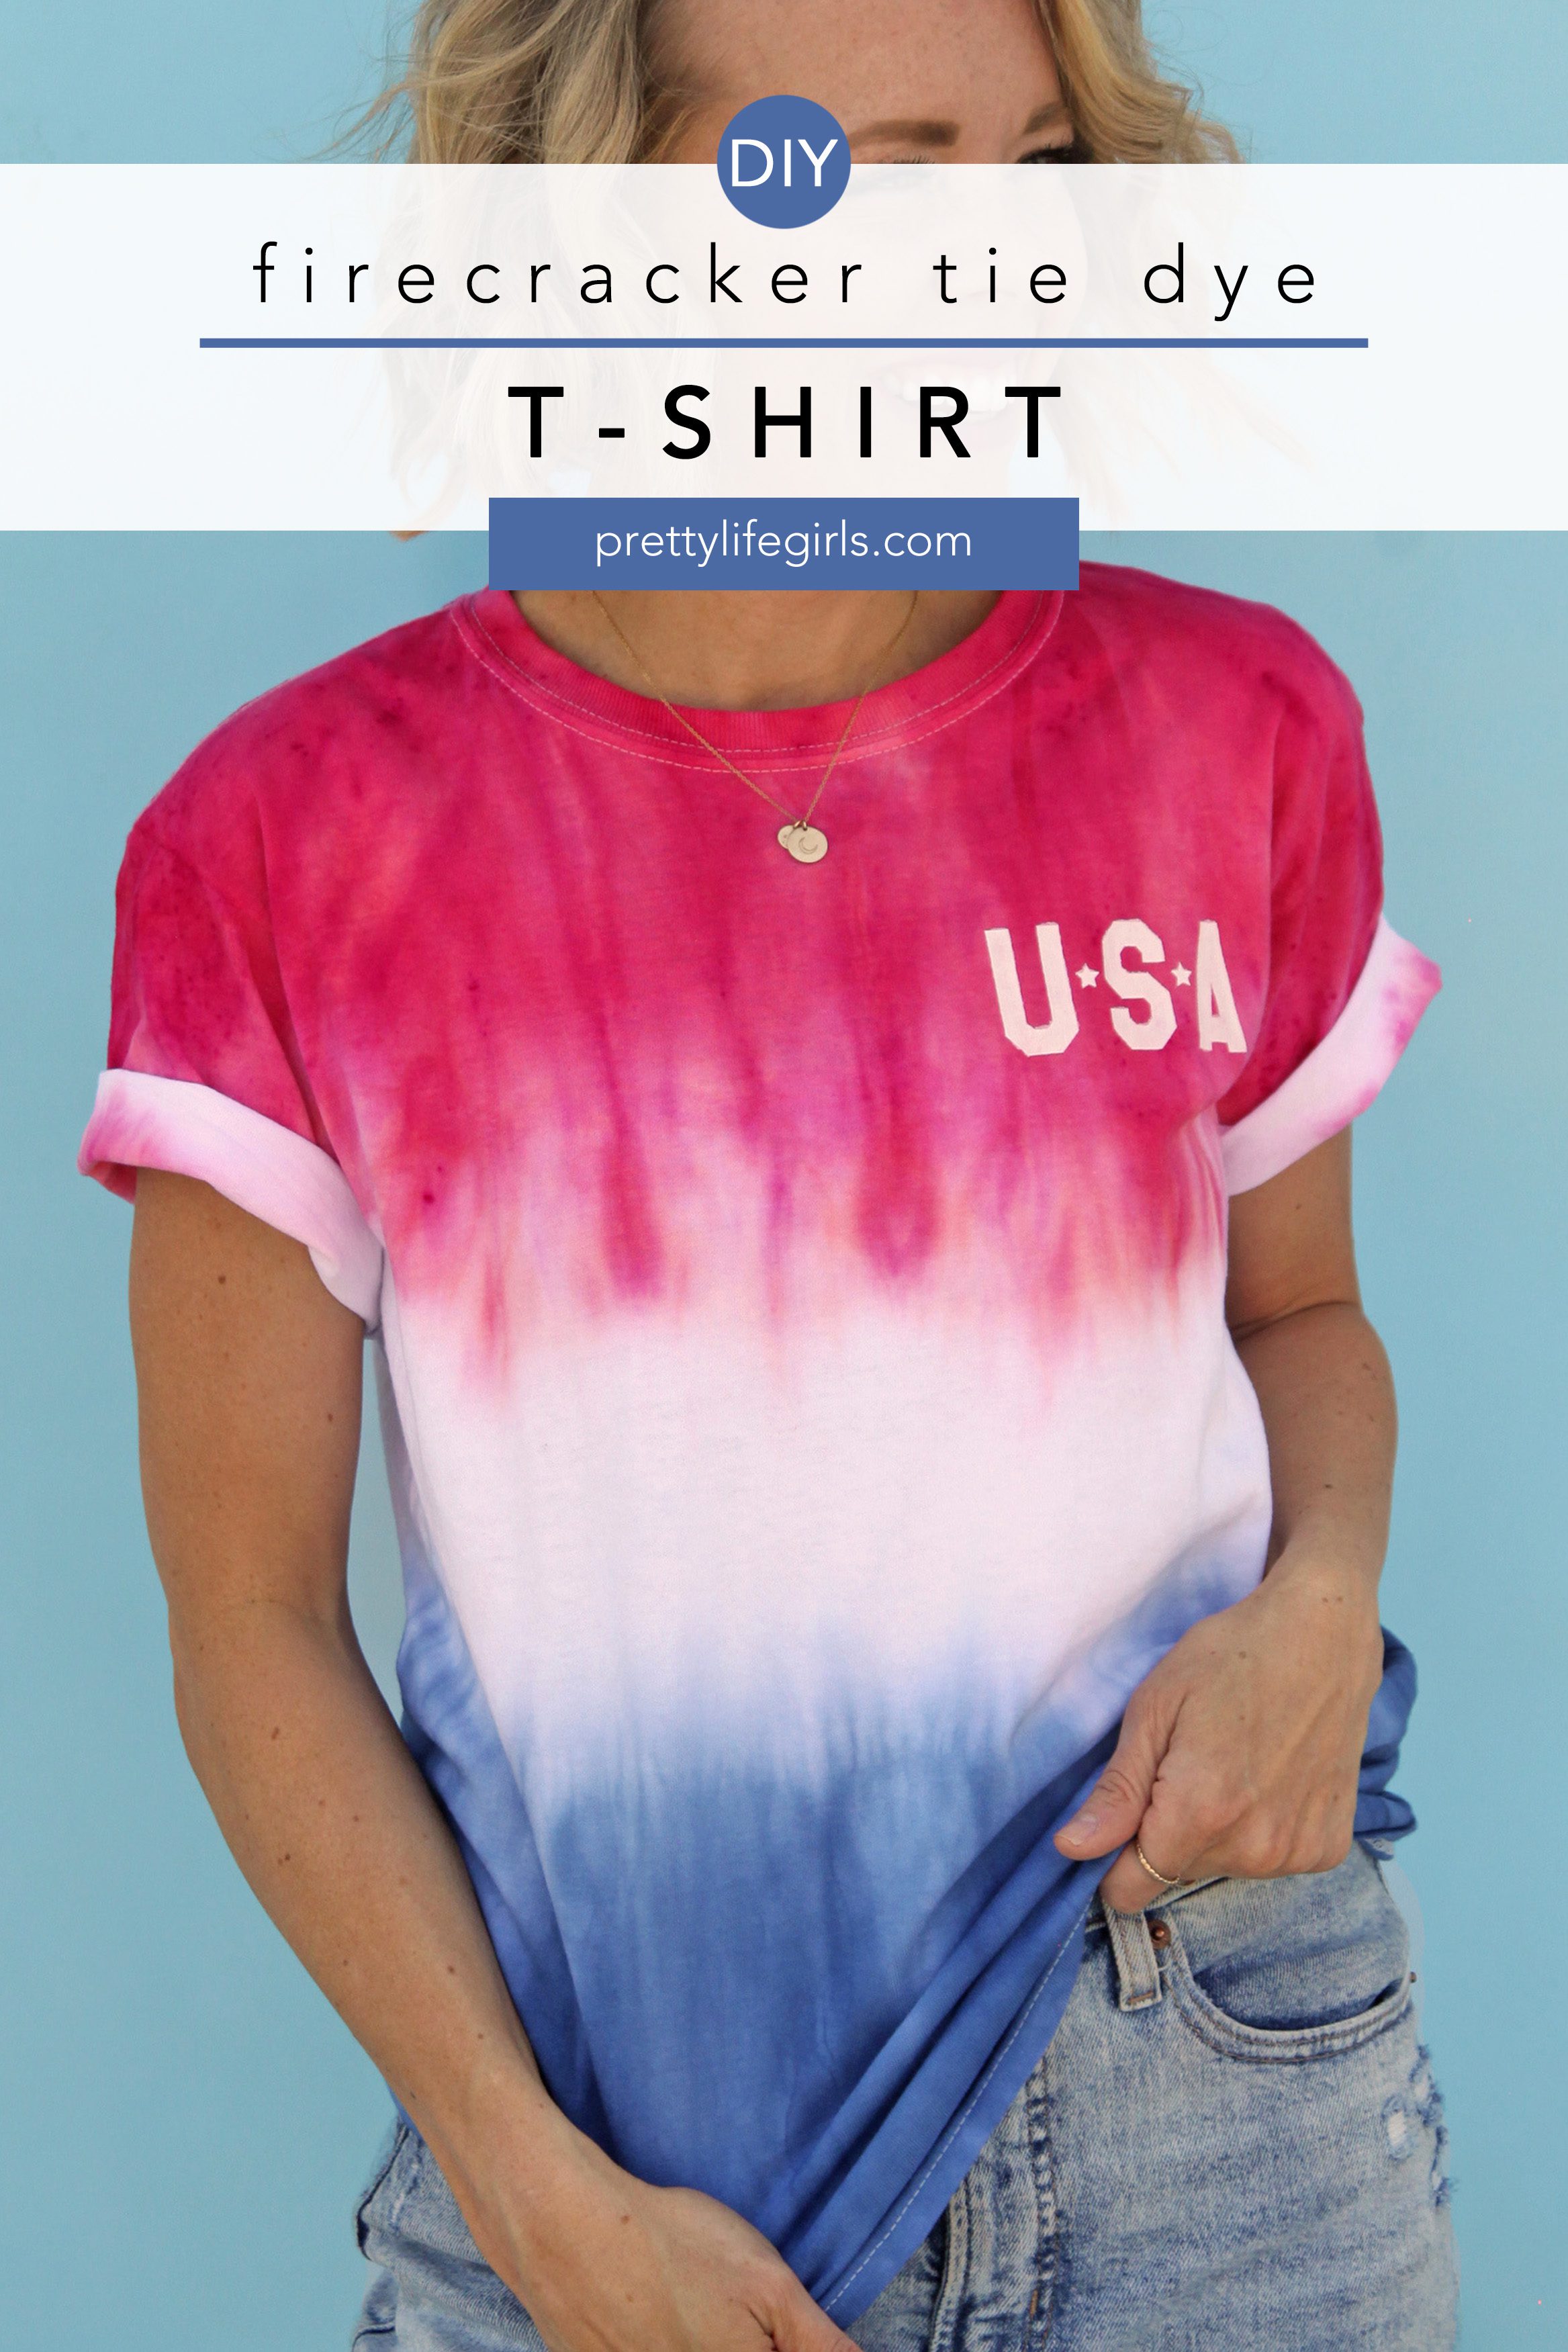 How to Firecracker Tie Dye a T-Shirt + a tutorial featured by Top US Craft Blog + The Pretty Life Girls